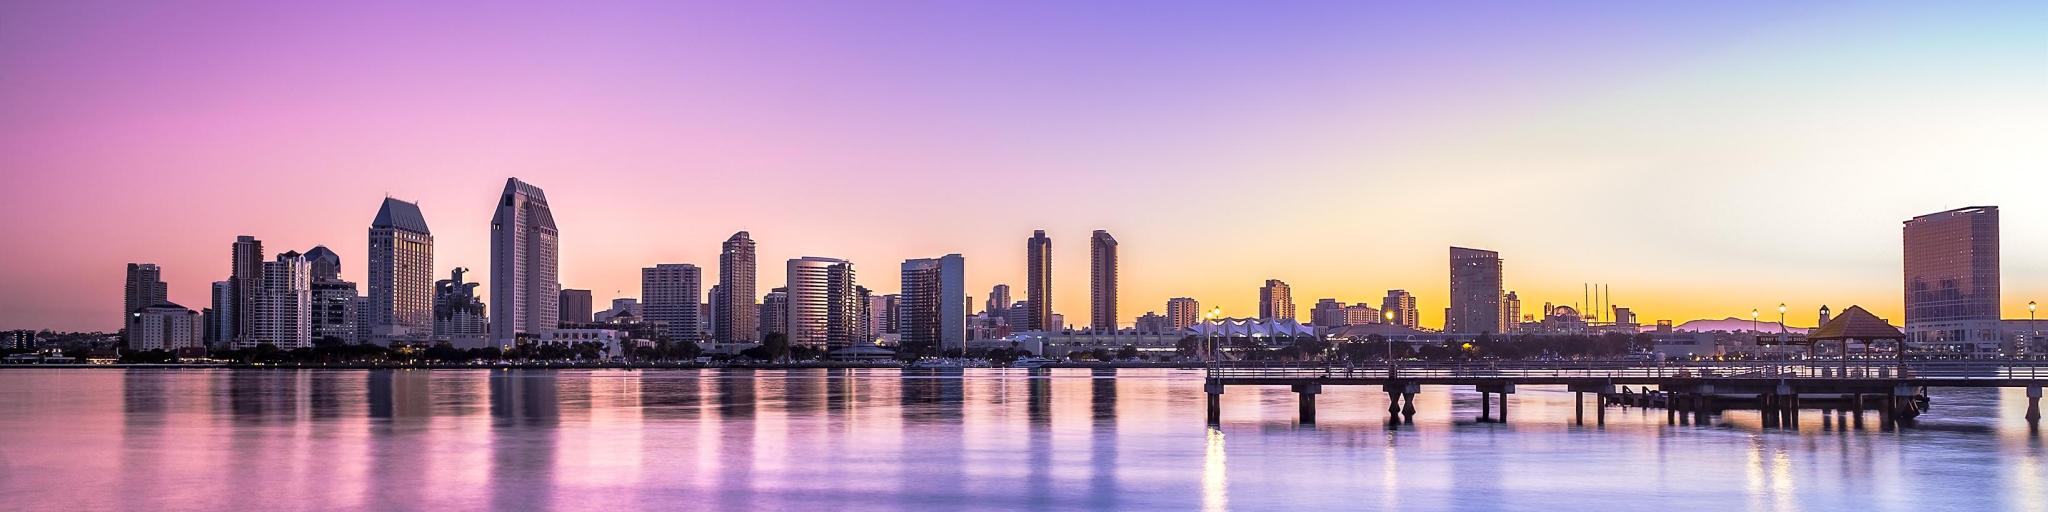 San Diego skyline at sunset with a pink and purple sky behind skyscrapers and water in front